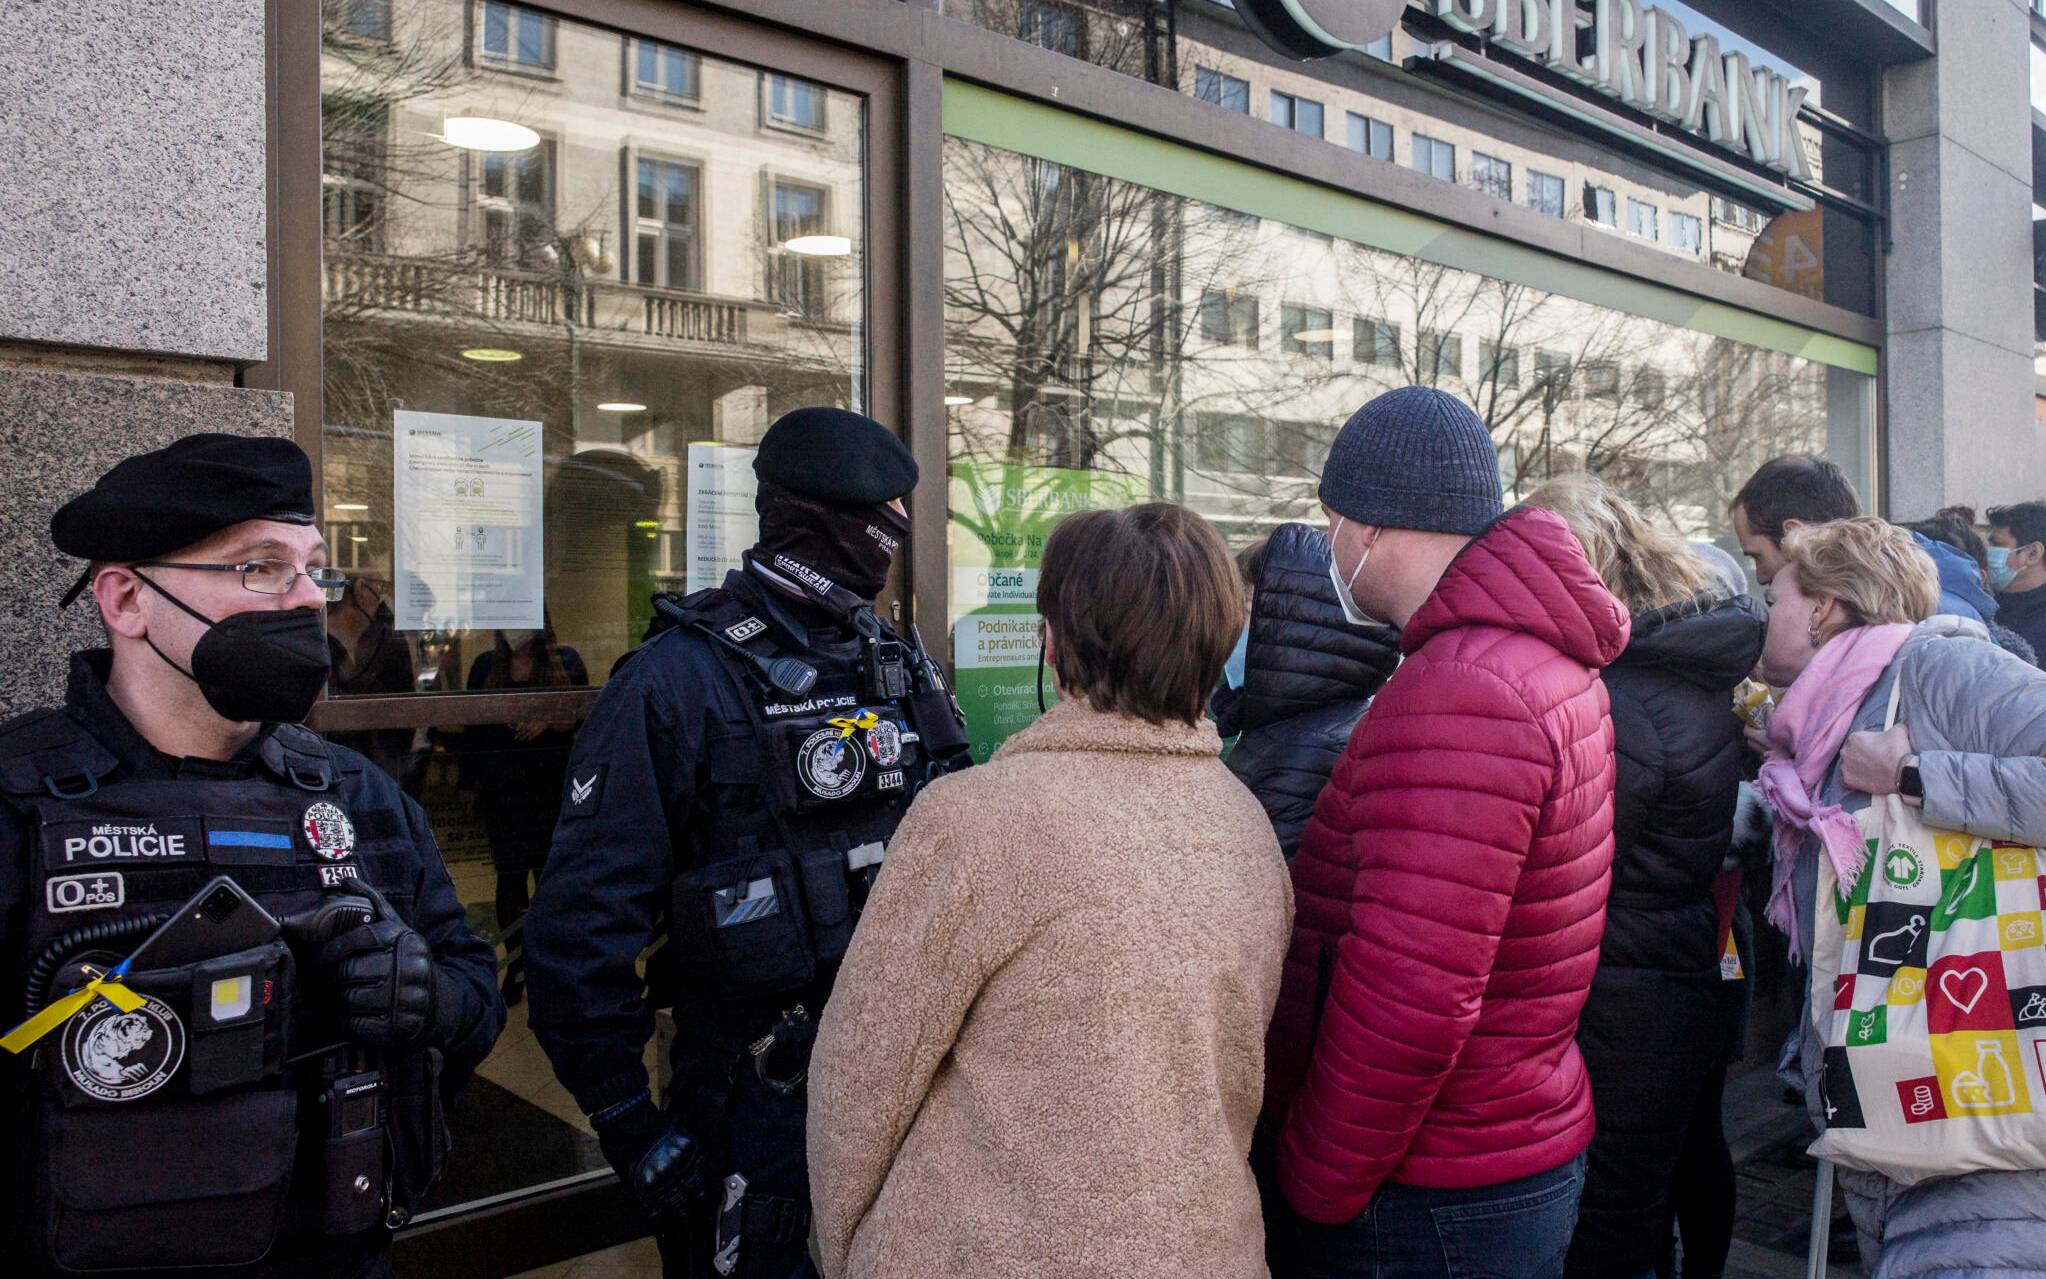 People queue outside a branch of Russian state-owned bank Sberbank to withdraw their savings and close their accounts in Prague on February 25, 2022, before Sberbank will close all its branches in the Czech Republic later in the day. - US President Biden was the first to announce sanctions, hours after Russian President Putin declared a "military operation" into Ukraine. The first tranche will hit four Russian banks -- including the country's two largest, Sberbank and VTB Bank -- cut off more than half of Russia's technology imports, and target several of the country's oligarchs. (Photo by Michal Cizek / AFP)